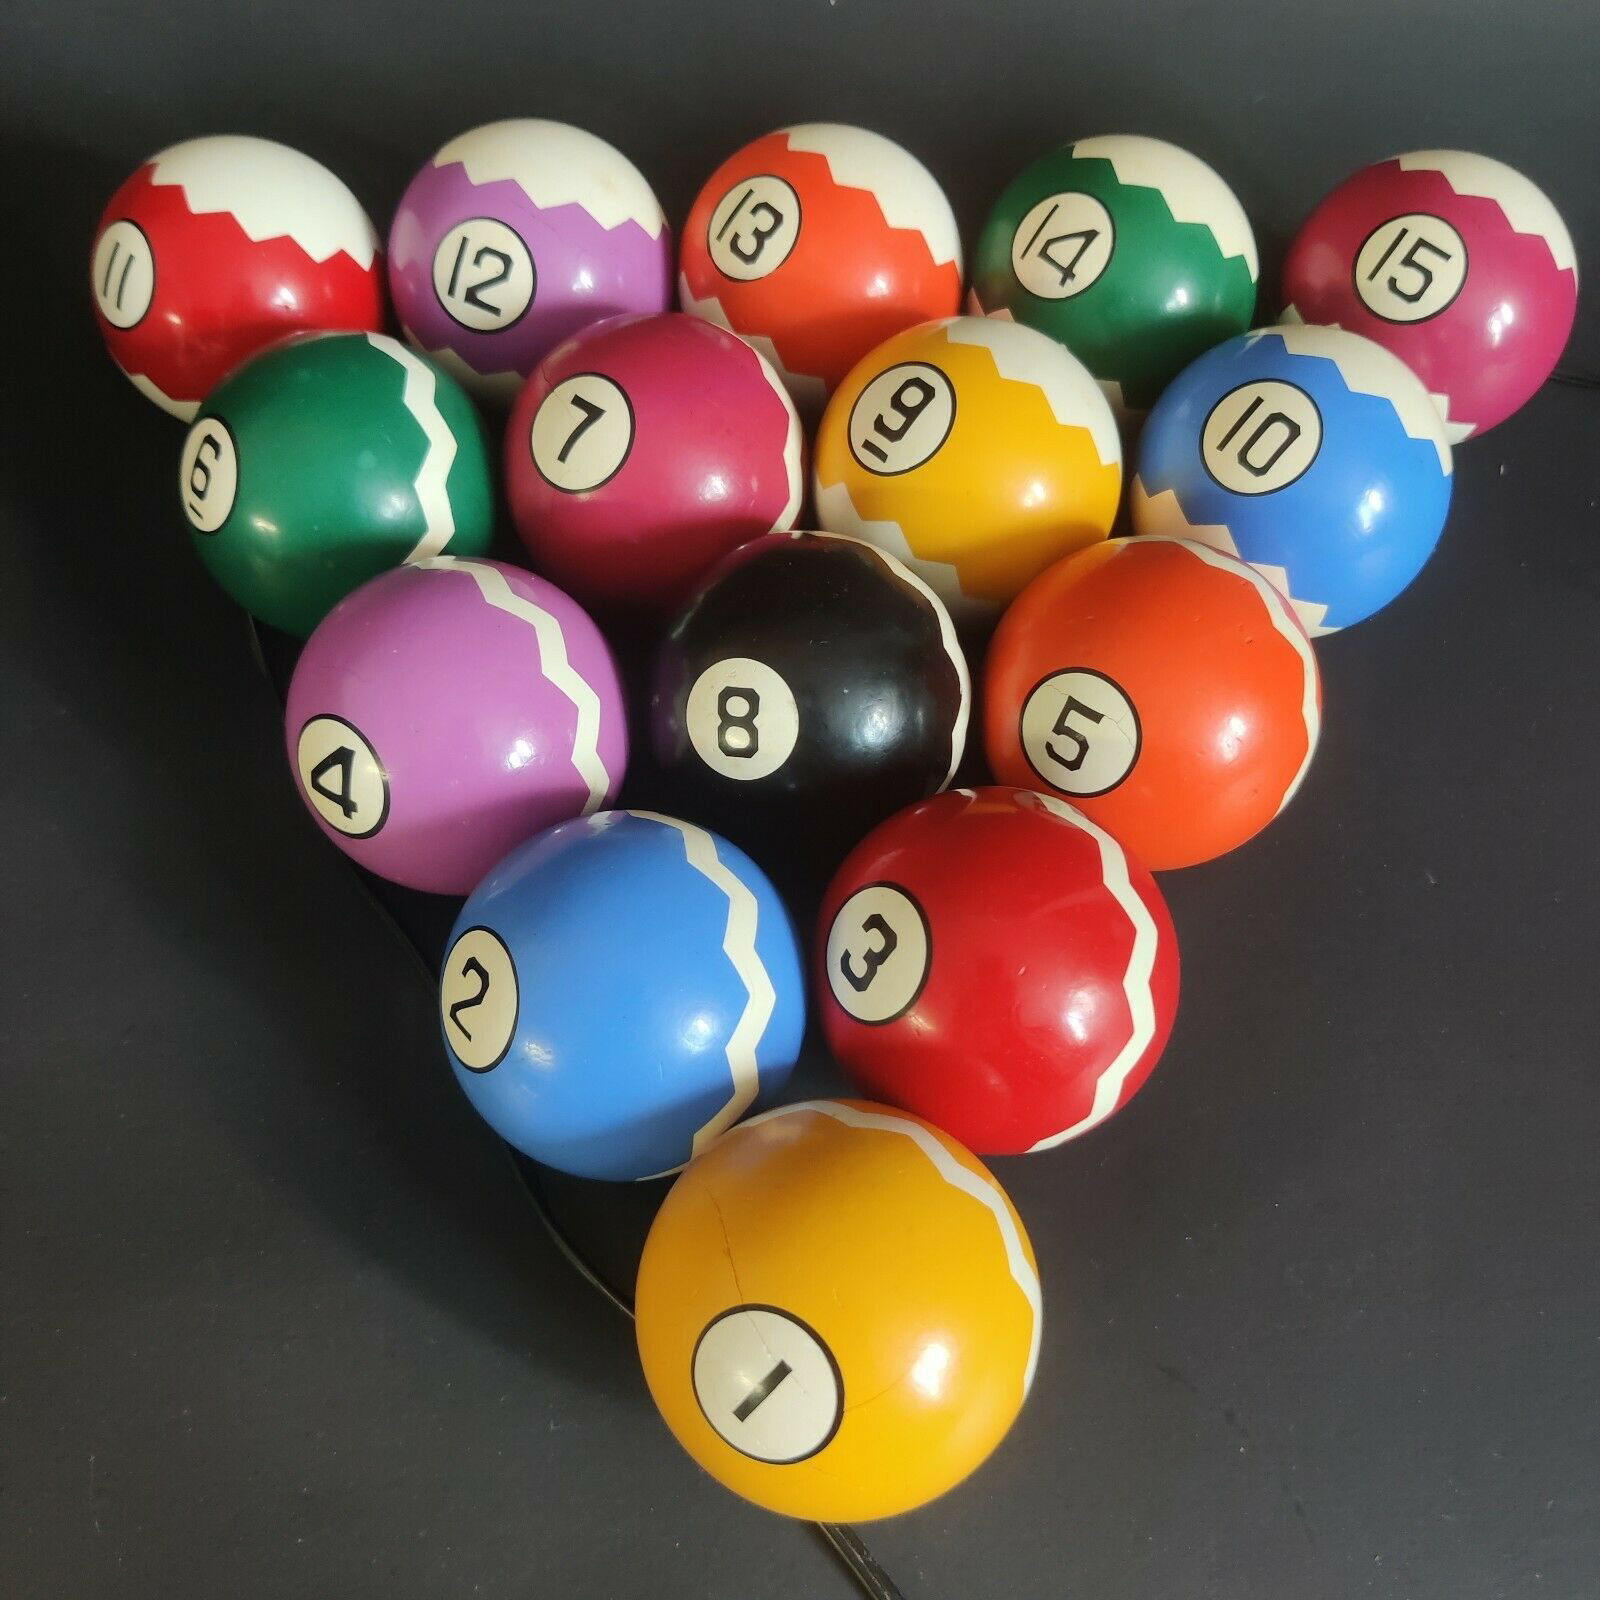 Details about   Antique Pool Billiards  Pool Ball Set 2 1/4"  very good condition 